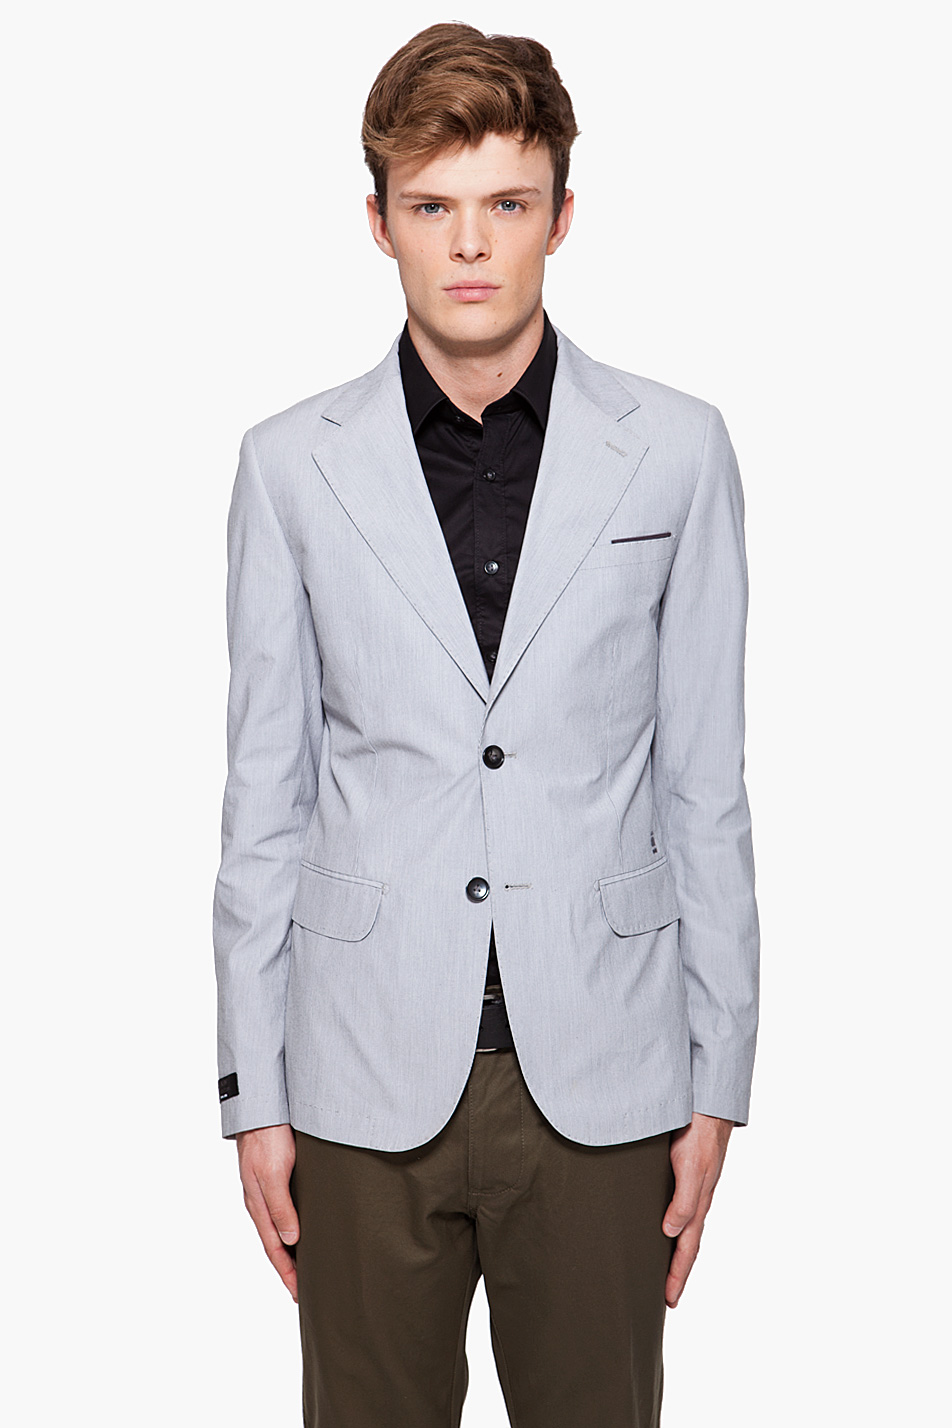 Lyst - G-Star Raw Cl Tailored Blazer 1 in Gray for Men